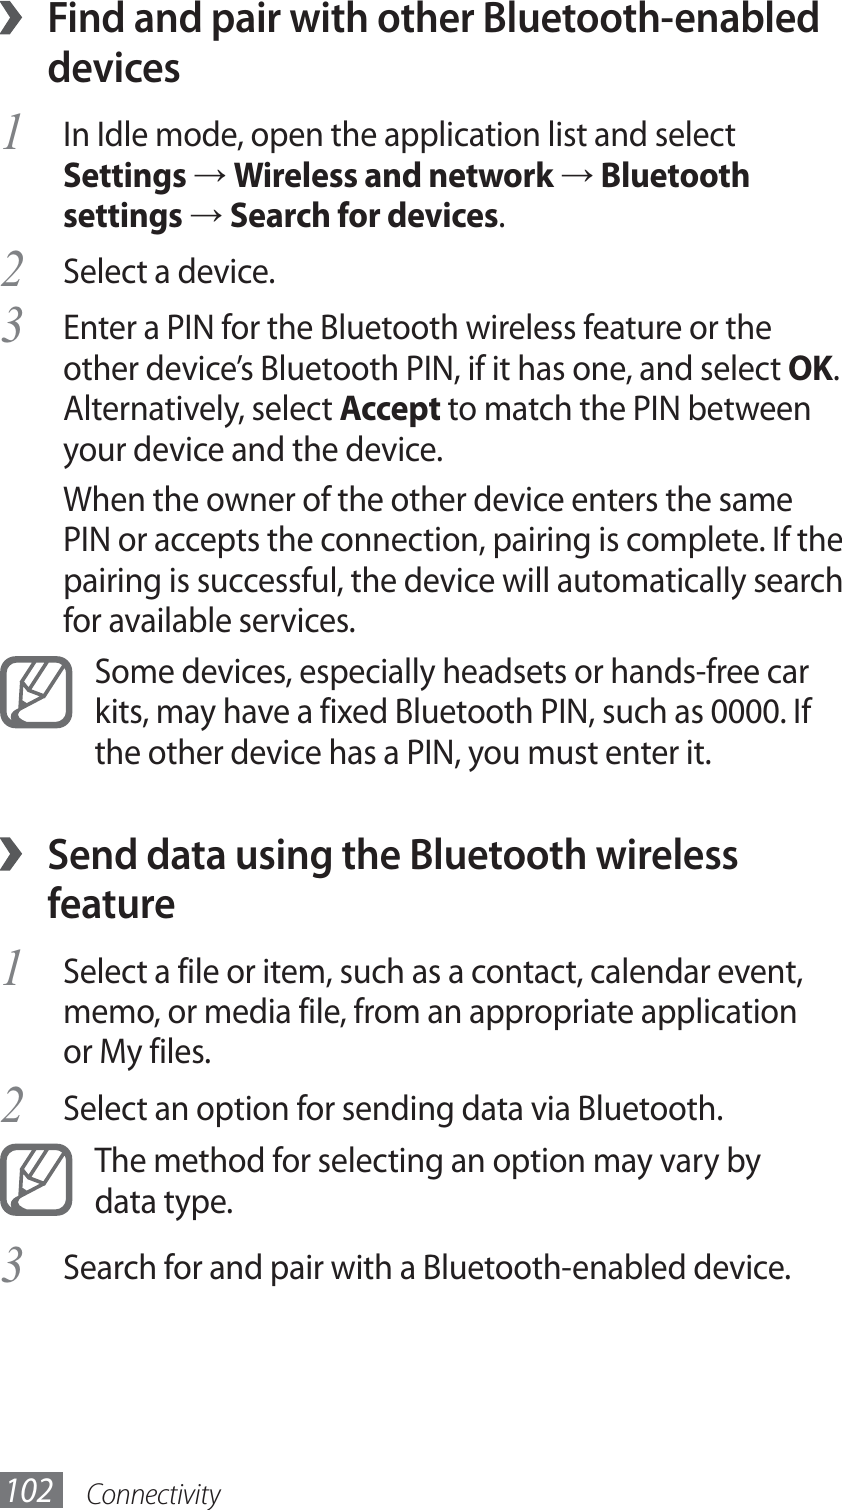 Connectivity102Find and pair with other Bluetooth-enabled  ›devicesIn Idle mode, open the application list and select 1 Settings → Wireless and network → Bluetooth settings → Search for devices.Select a device.2 Enter a PIN for the Bluetooth wireless feature or the 3 other device’s Bluetooth PIN, if it has one, and select OK. Alternatively, select Accept to match the PIN between your device and the device.When the owner of the other device enters the same PIN or accepts the connection, pairing is complete. If the pairing is successful, the device will automatically search for available services.Some devices, especially headsets or hands-free car kits, may have a fixed Bluetooth PIN, such as 0000. If the other device has a PIN, you must enter it.Send data using the Bluetooth wireless  ›featureSelect a file or item, such as a contact, calendar event, 1 memo, or media file, from an appropriate application or My files.Select an option for sending data via Bluetooth.2 The method for selecting an option may vary by data type.Search for and pair with a Bluetooth-enabled device.3 